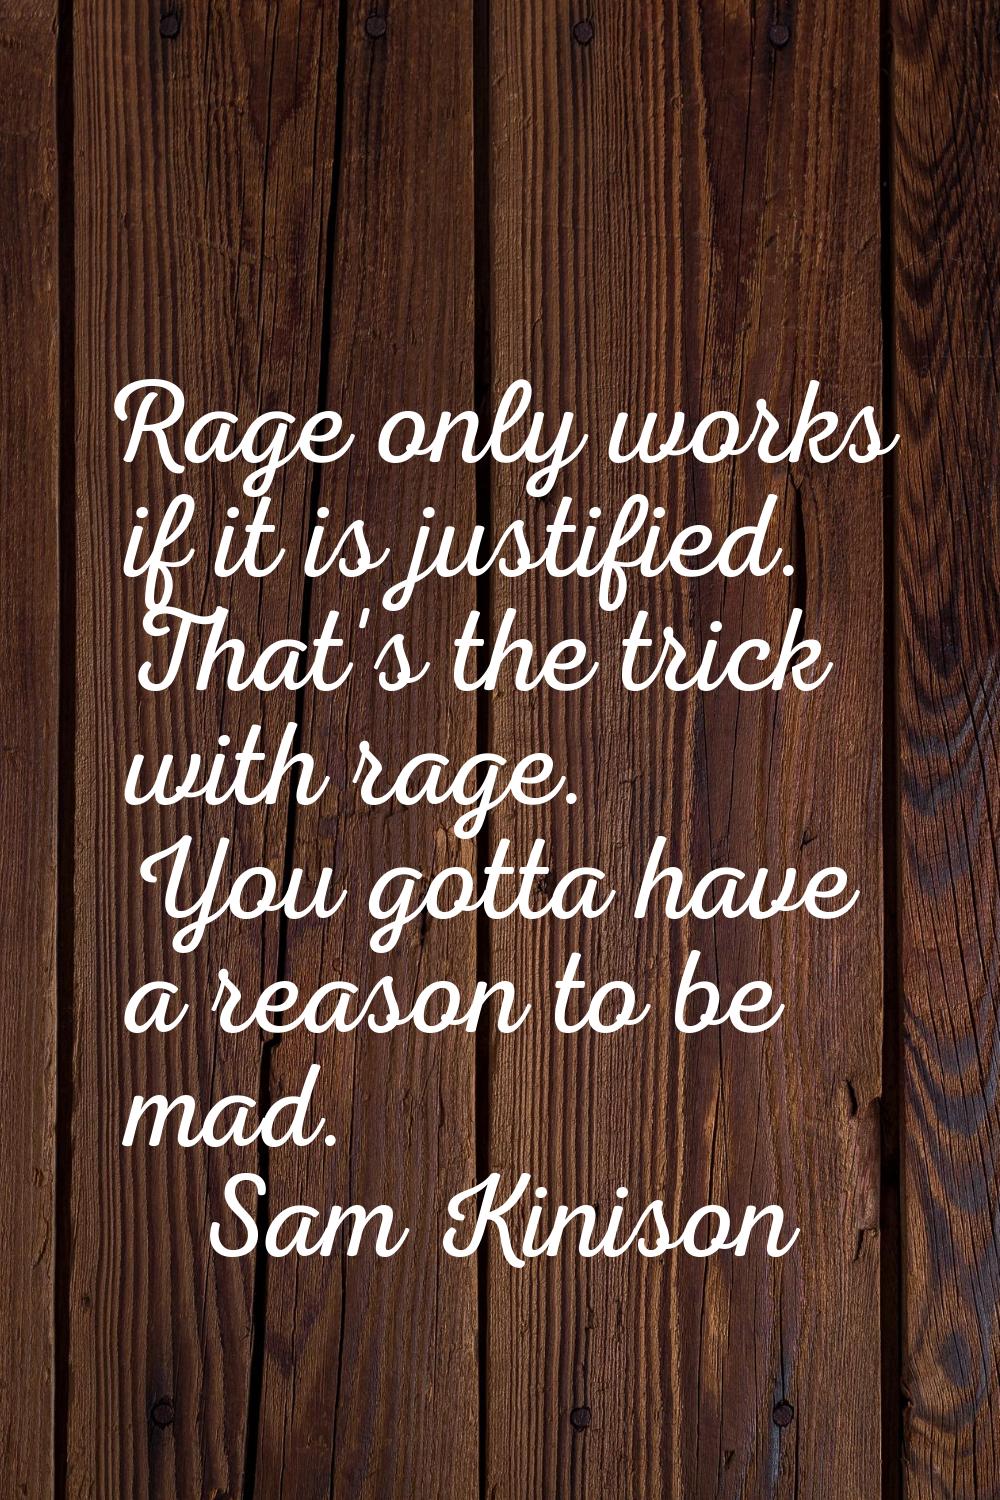 Rage only works if it is justified. That's the trick with rage. You gotta have a reason to be mad.